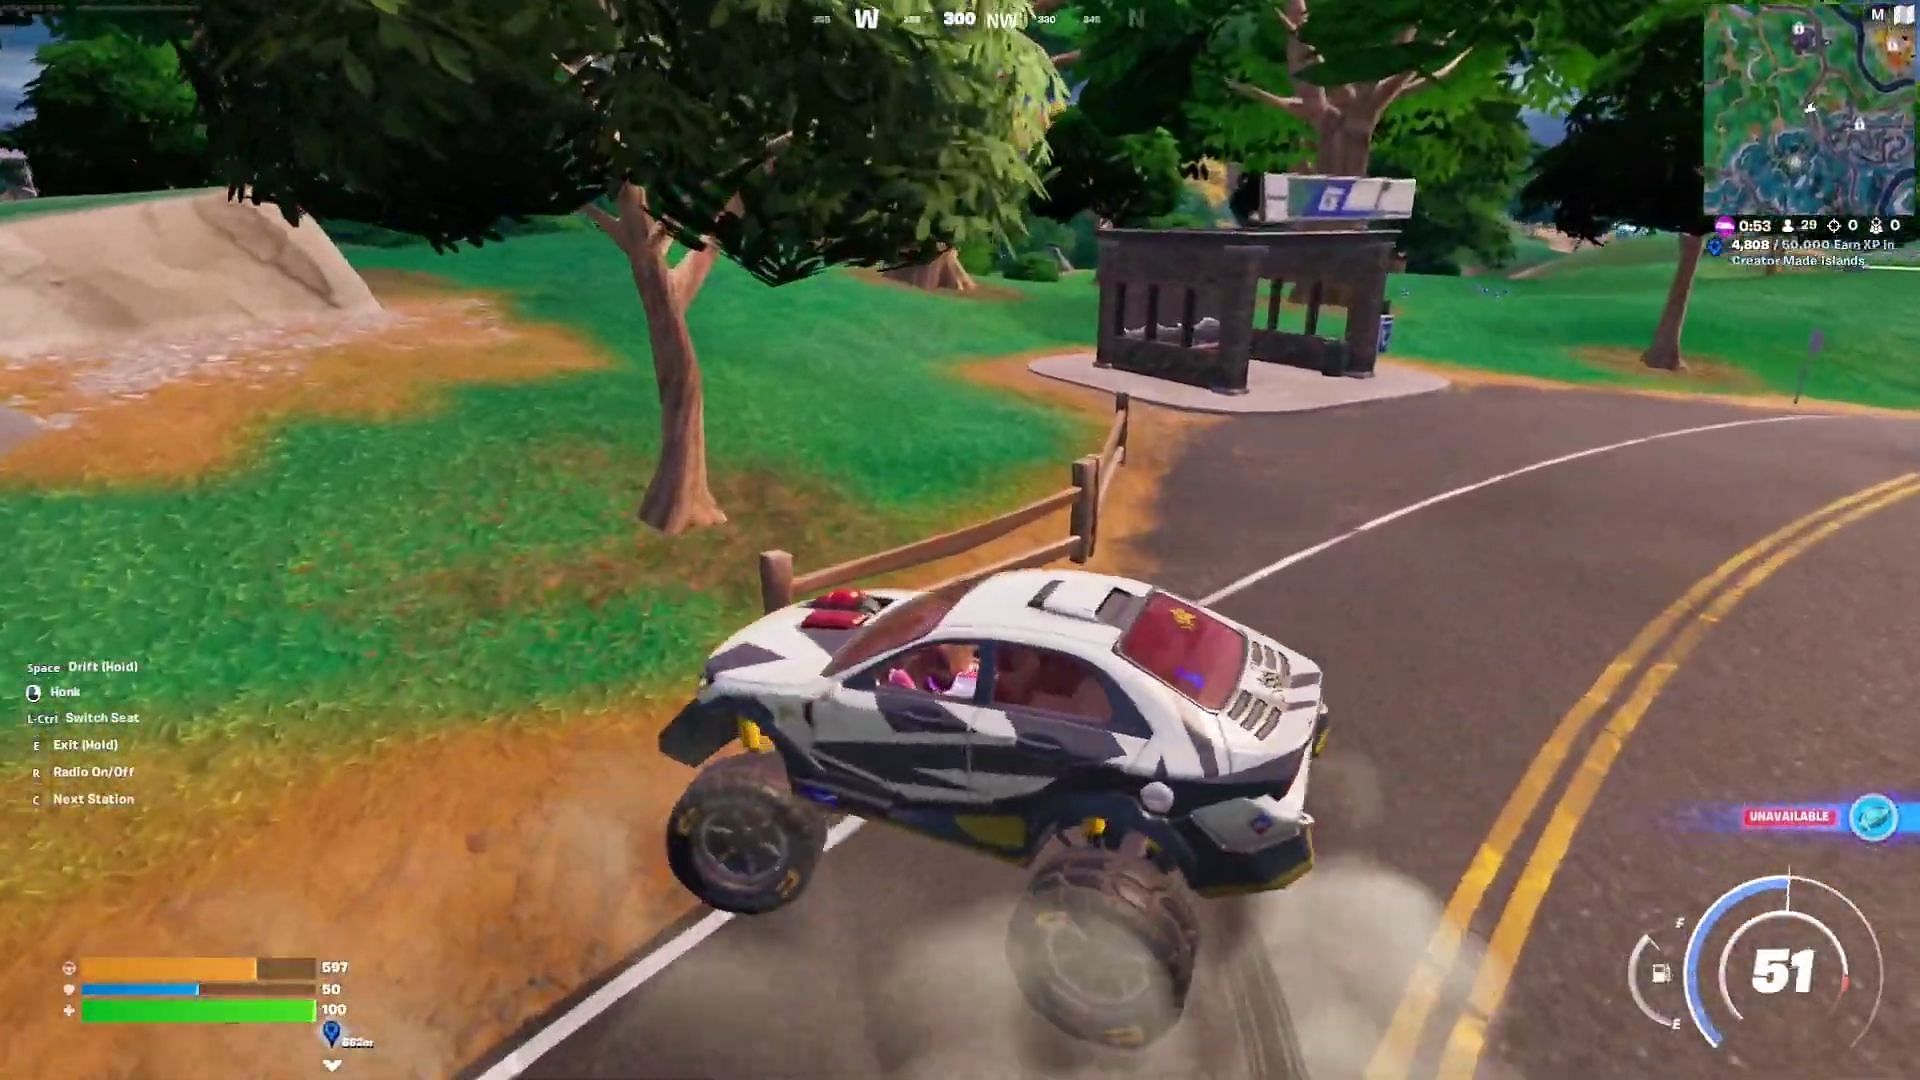 You need to destroy objects while drifting or boosting (Image via Epic Games)